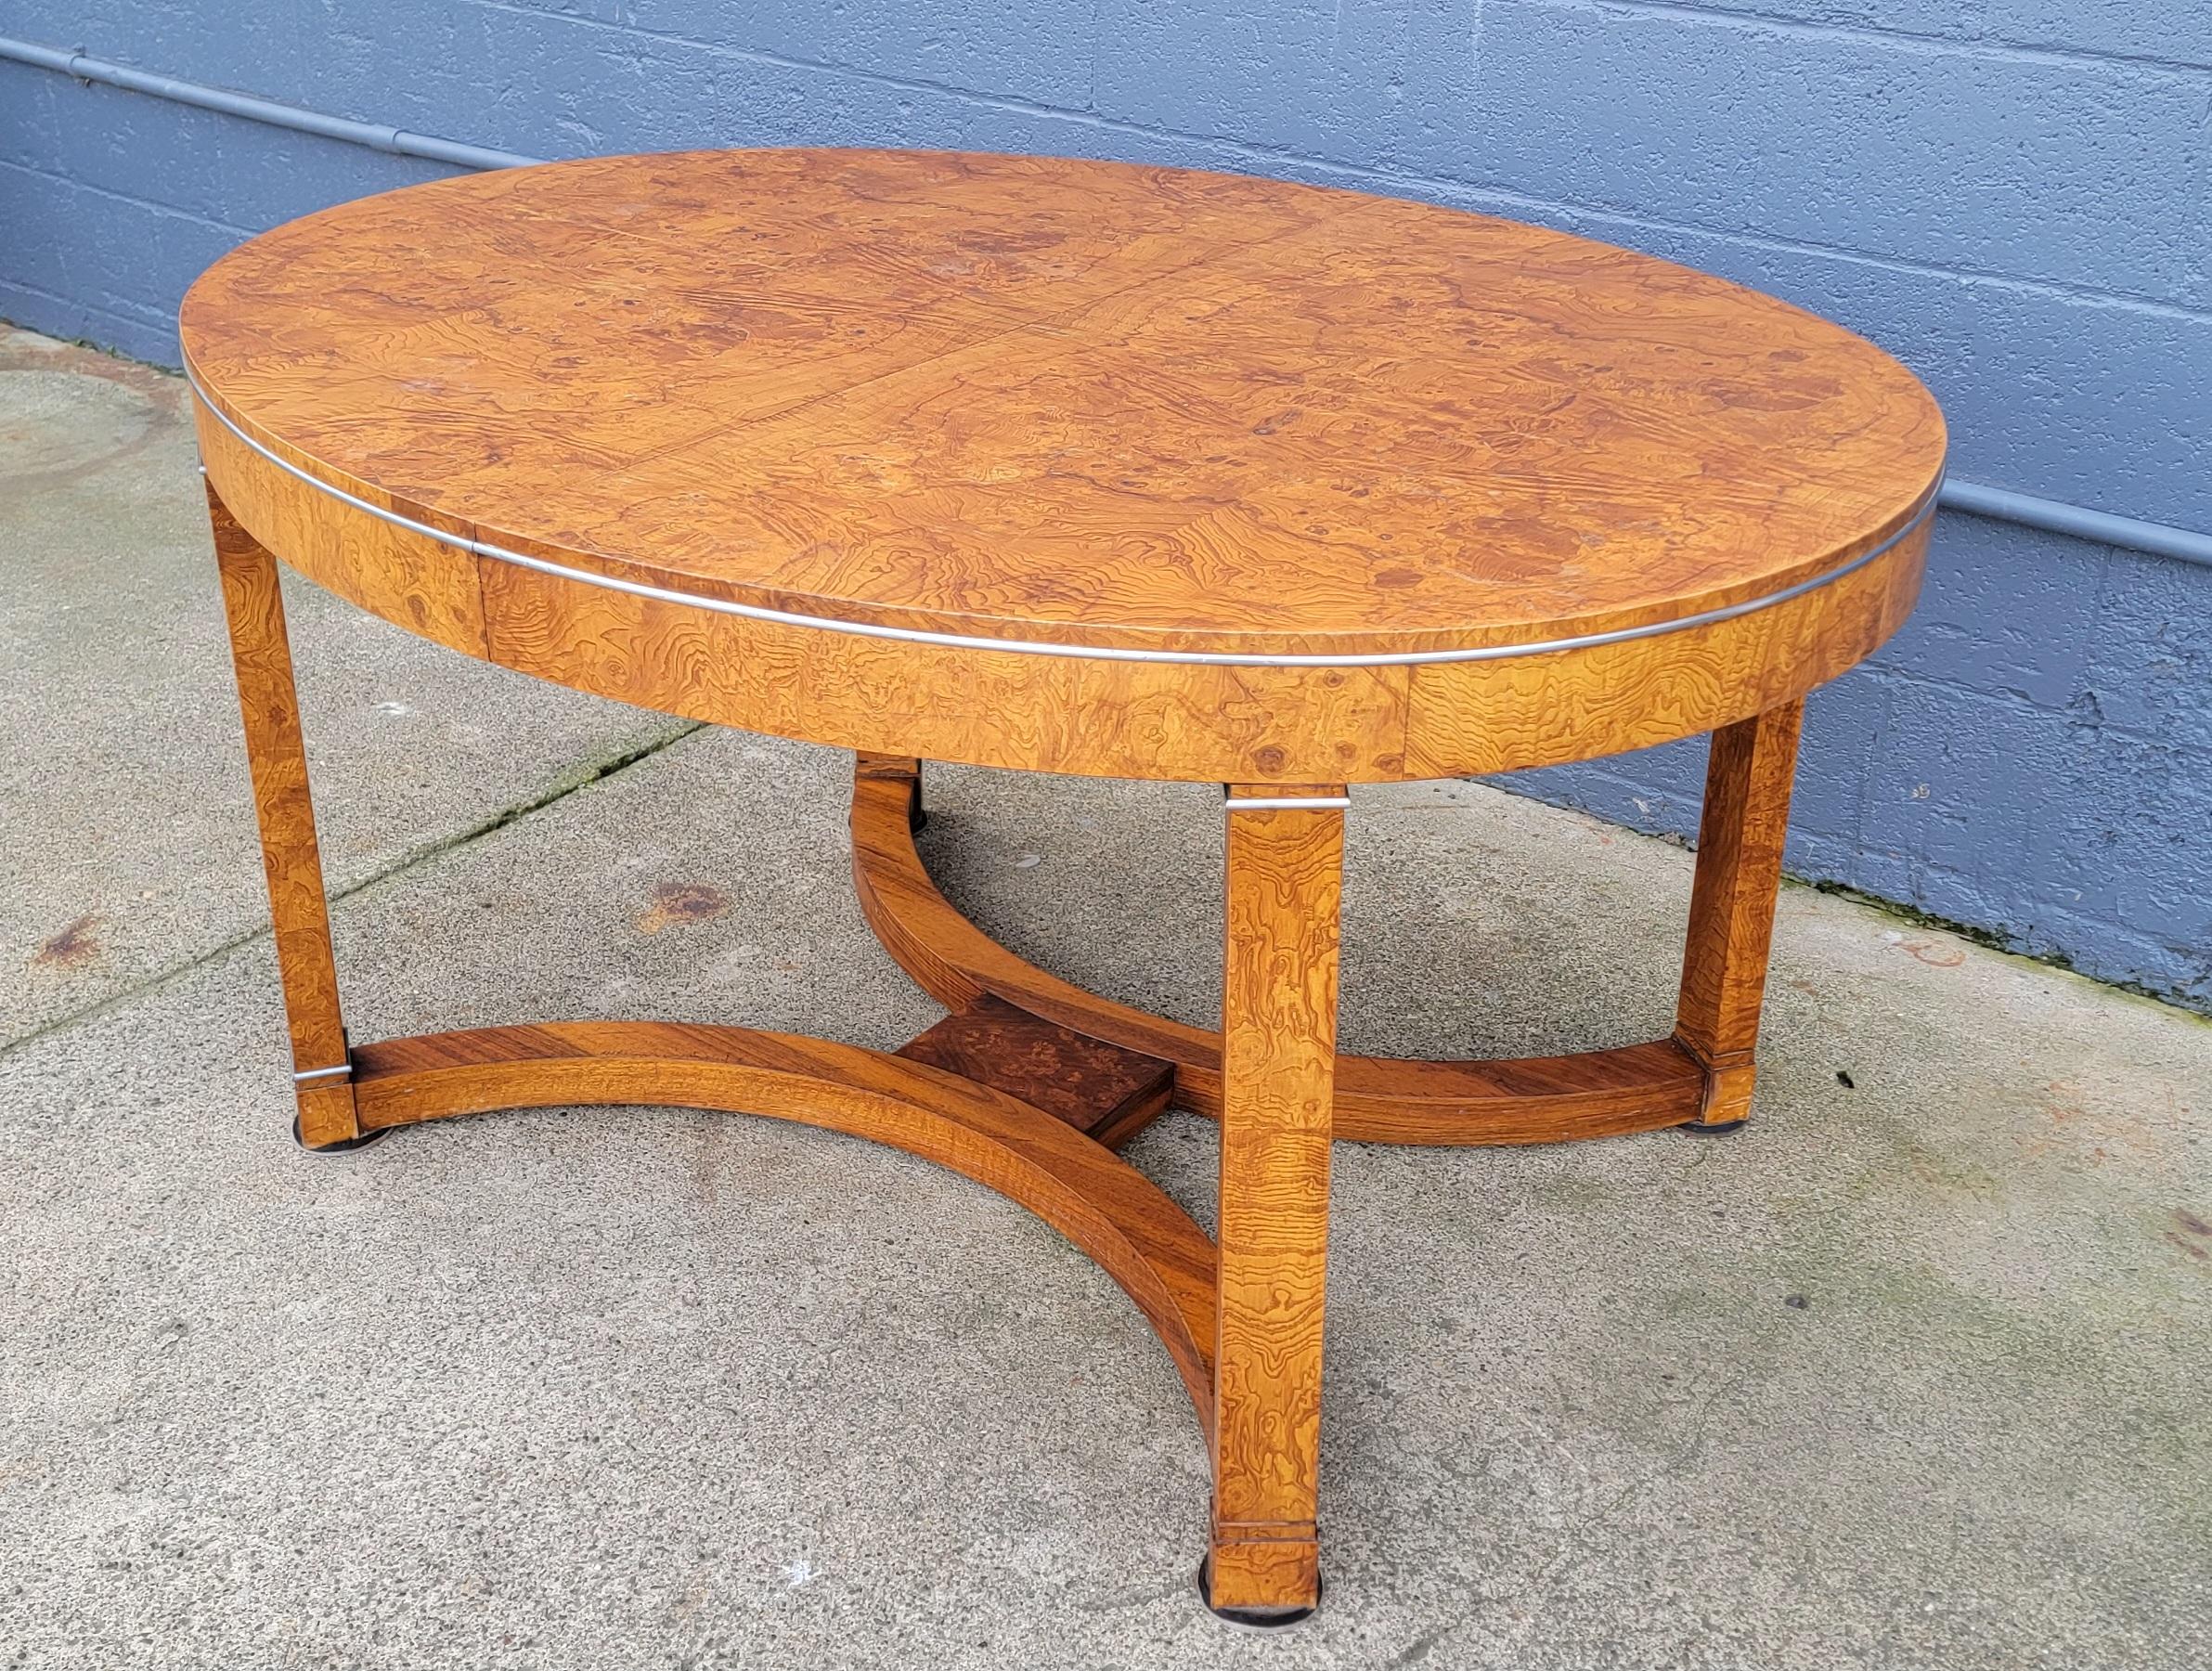 Exotic burl wood expanding oval dining table designed in the style of Biedermeier furniture and/or French Art Deco. Circa. 1950's. Beautiful book-matched burl wood grain. Includes two 13.13